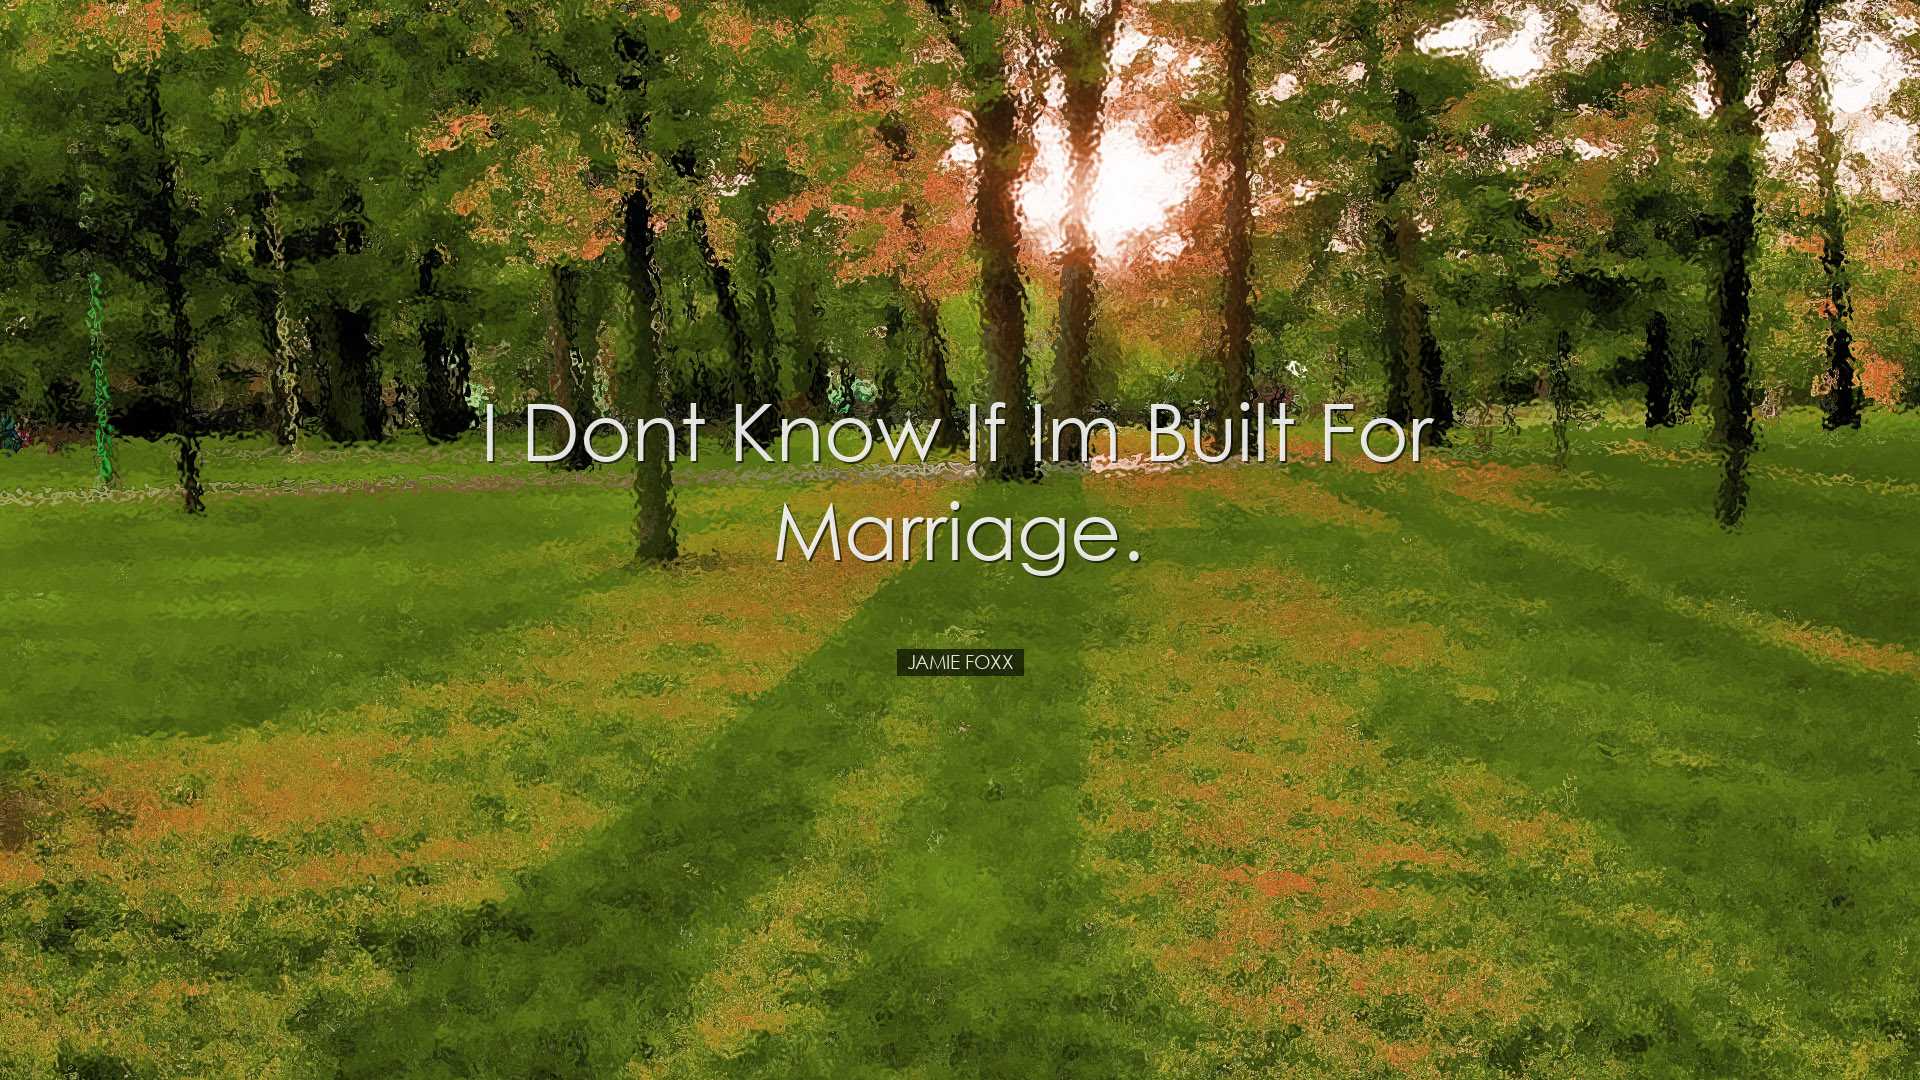 I dont know if Im built for marriage. - Jamie Foxx